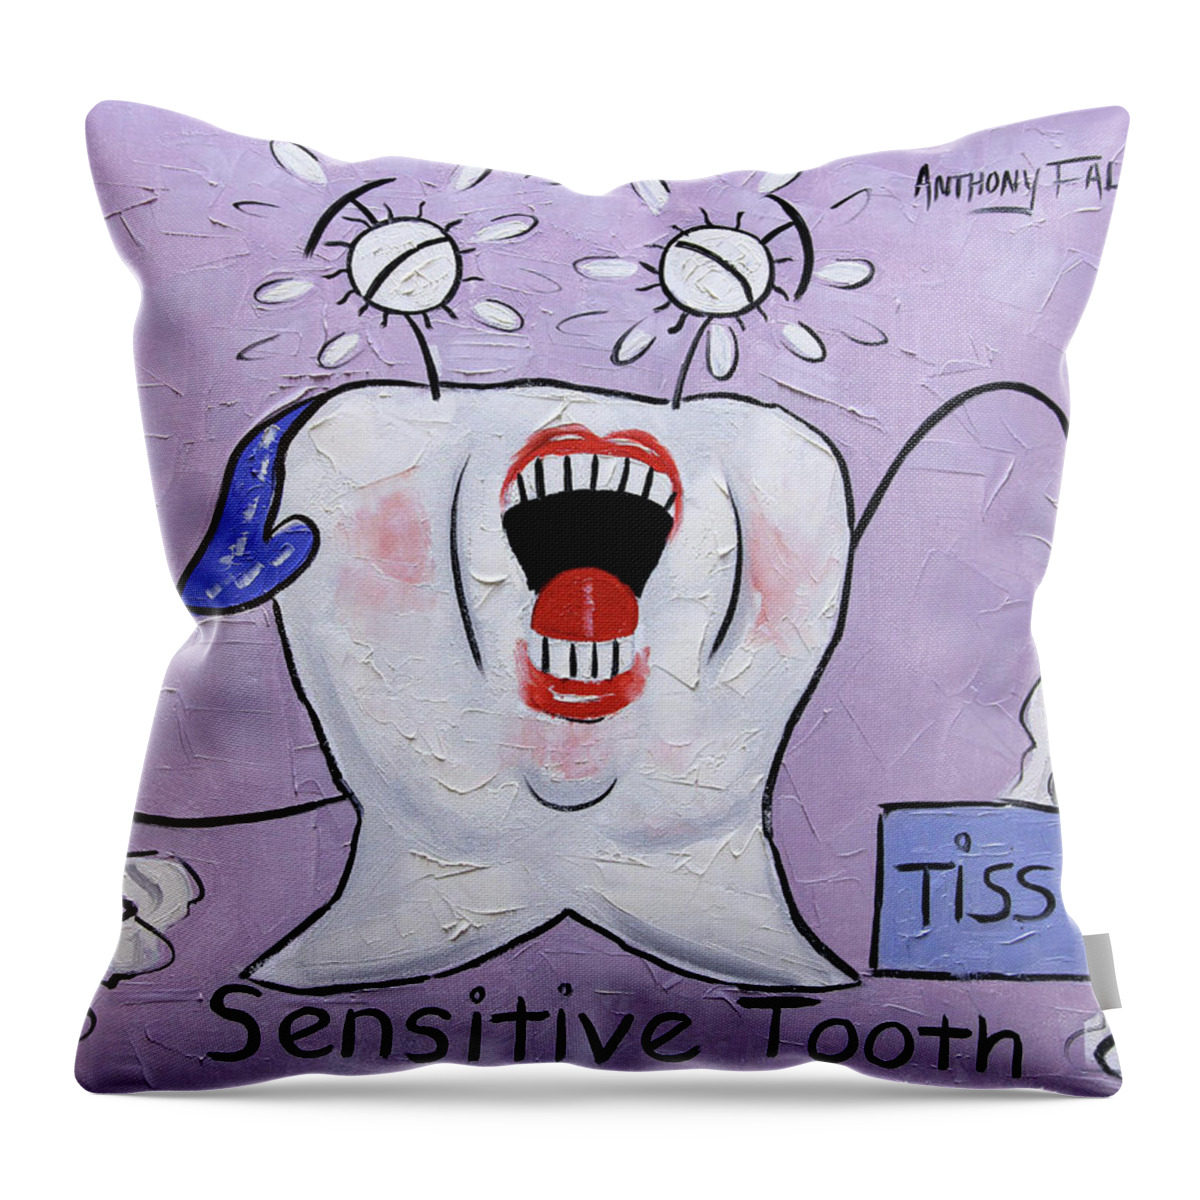 Sensitive Tooth Throw Pillow featuring the painting Sensitive Tooth by Anthony Falbo